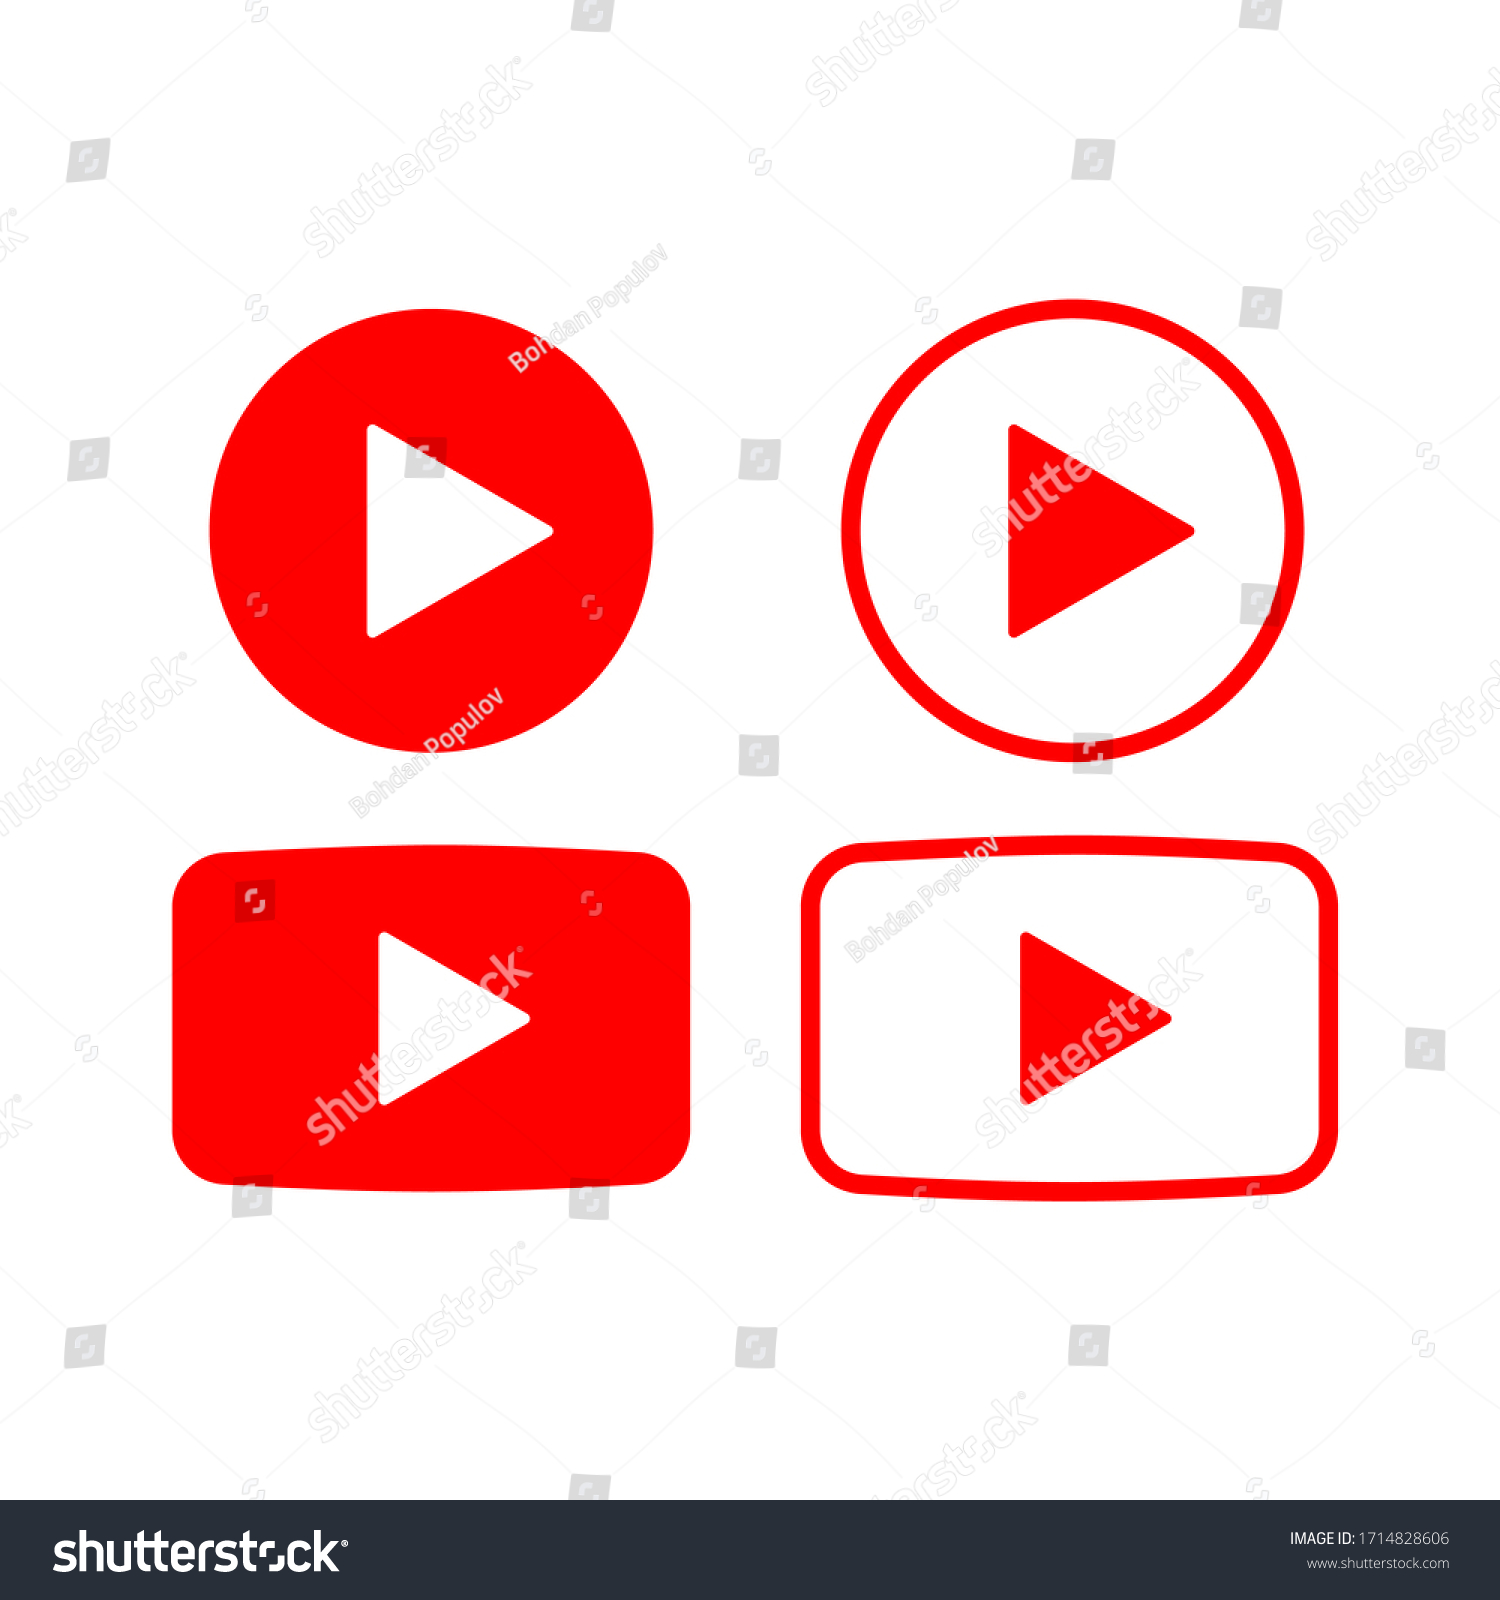 Play video icon, red buttons sign vector isolated on white background . Vector illustration EPS10. #1714828606